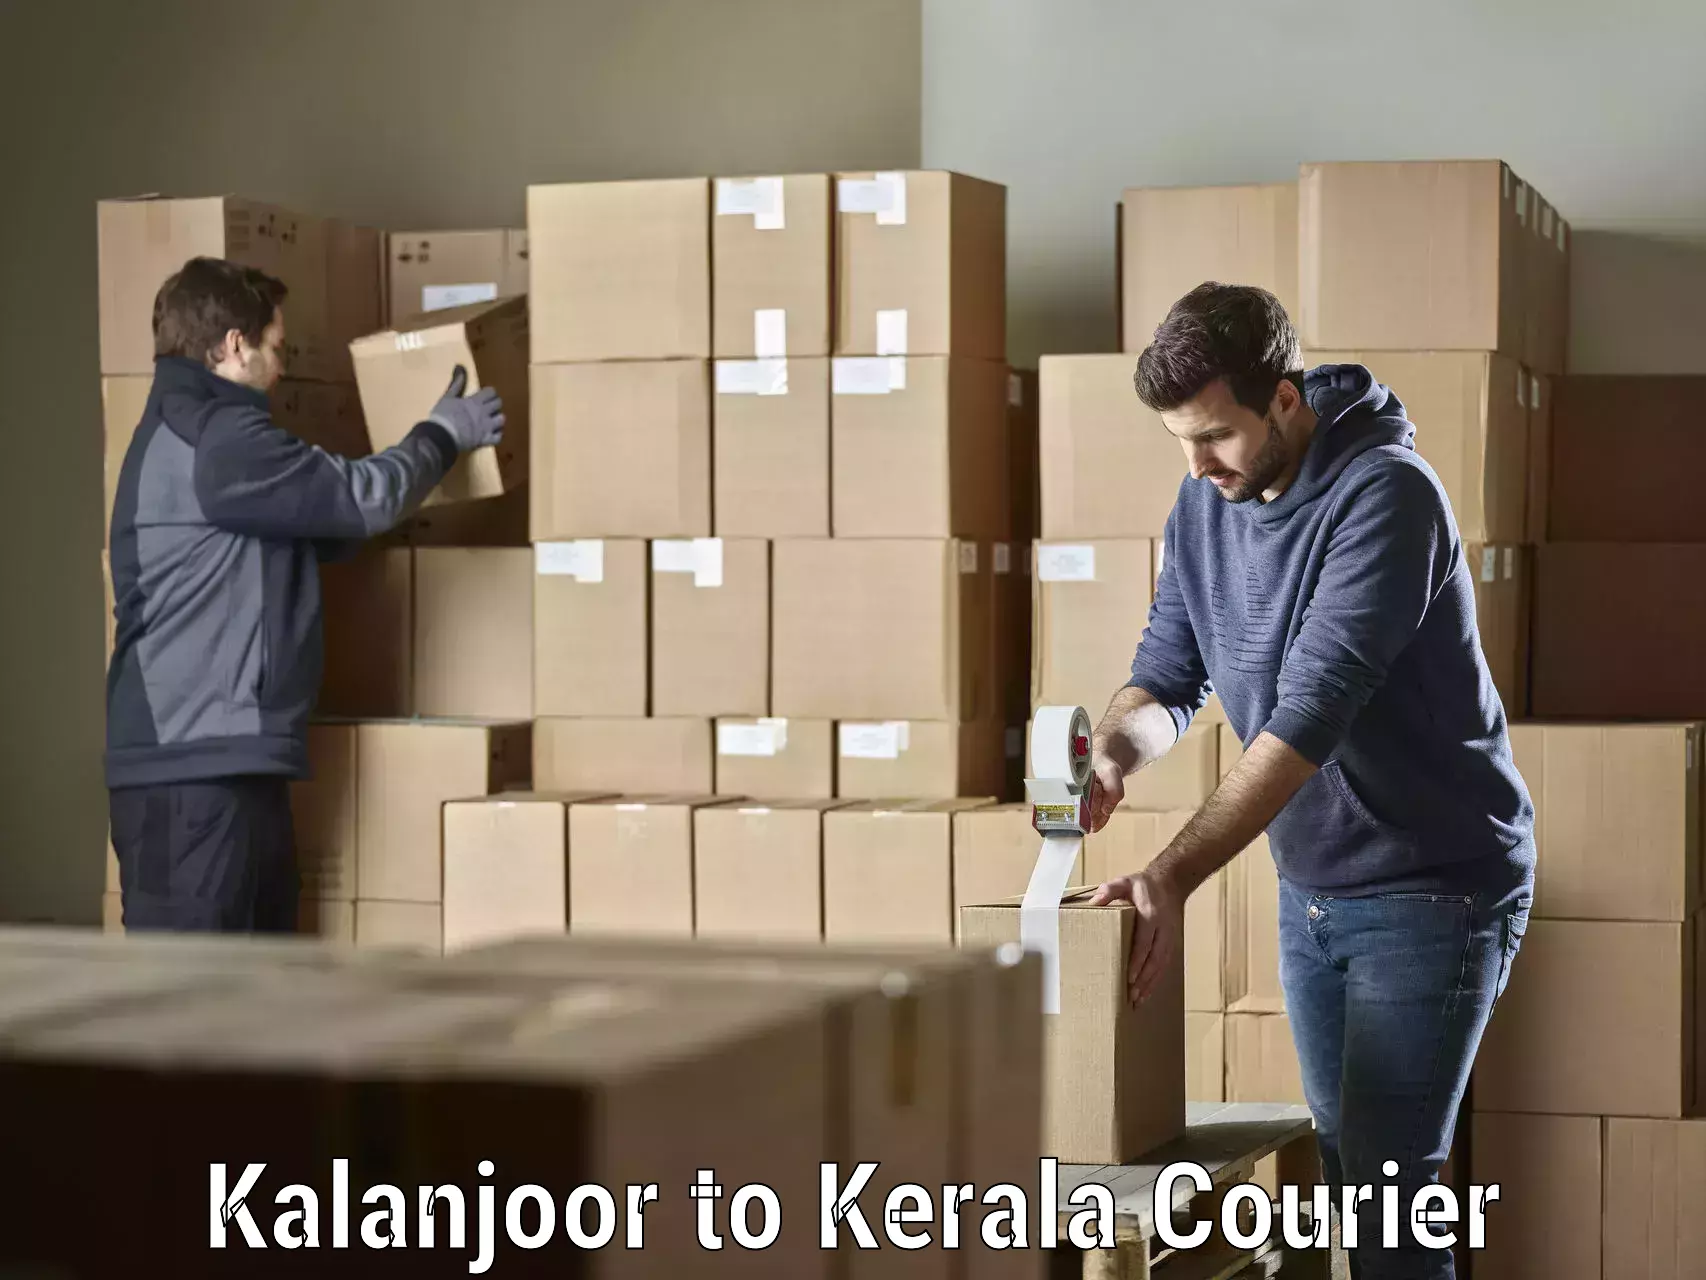 Easy return solutions Kalanjoor to Cochin University of Science and Technology